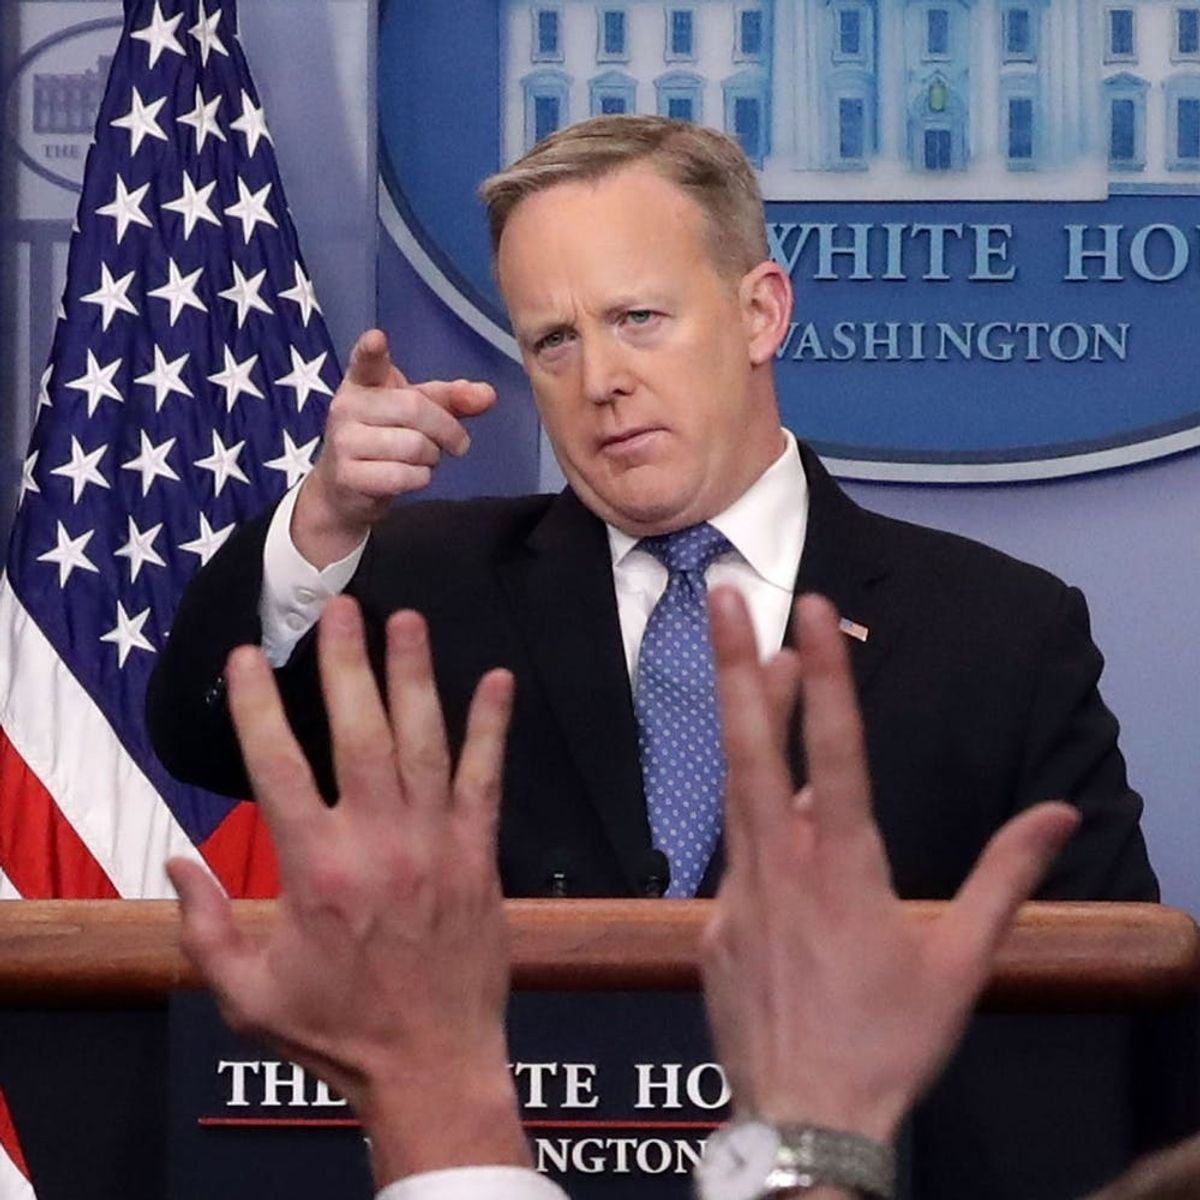 Whoa: The White House Just Banned Select Media Outlets from a Press Briefing